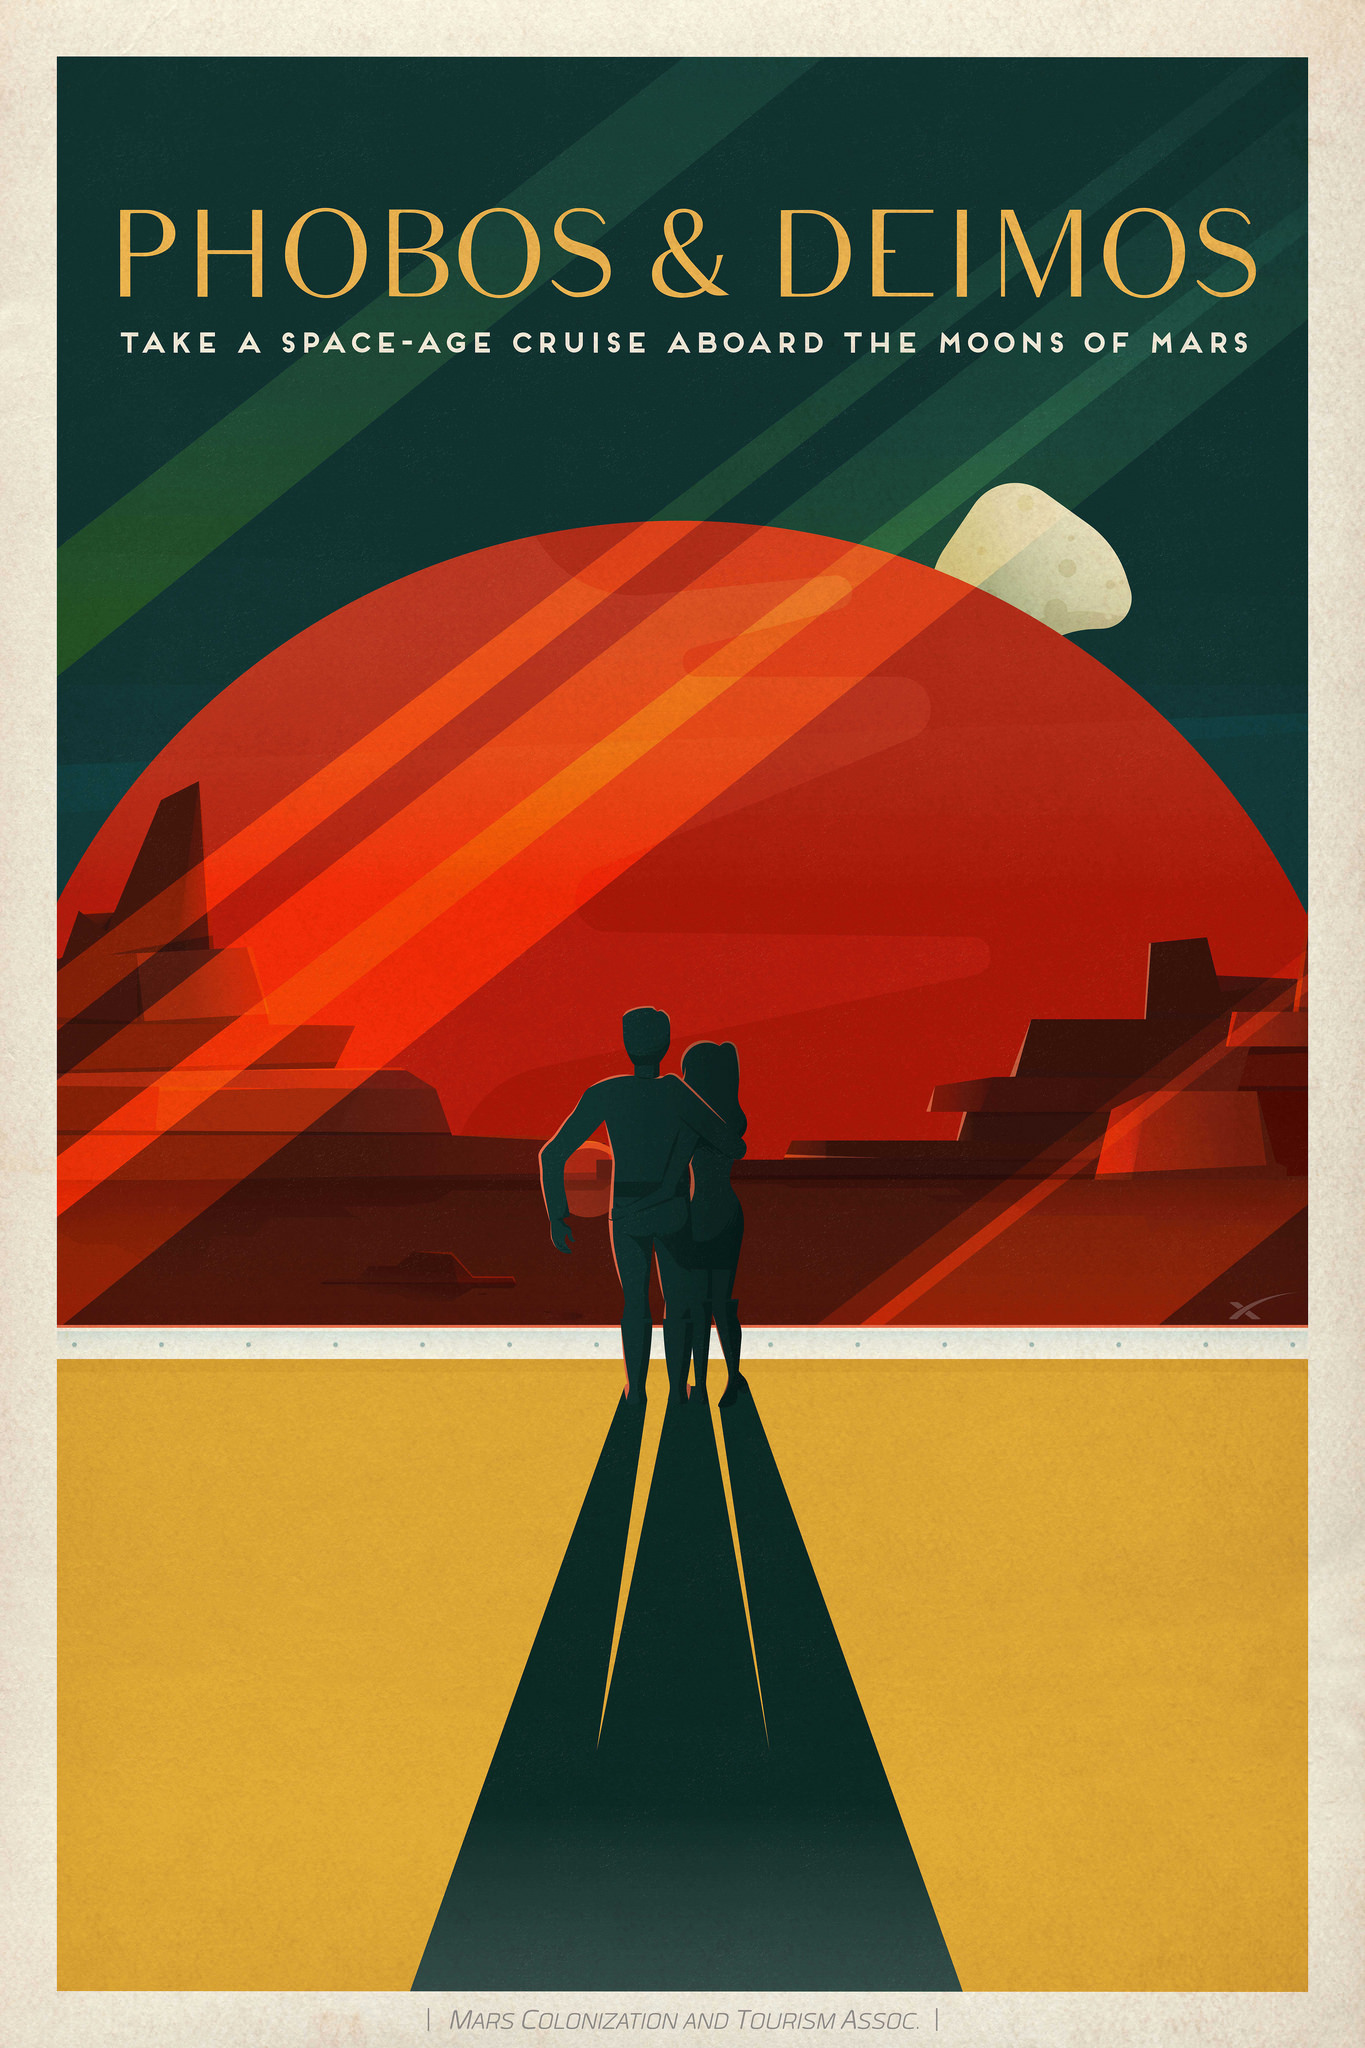 SpaceX Just Dropped These Amazing Retro Mars Travel Posters